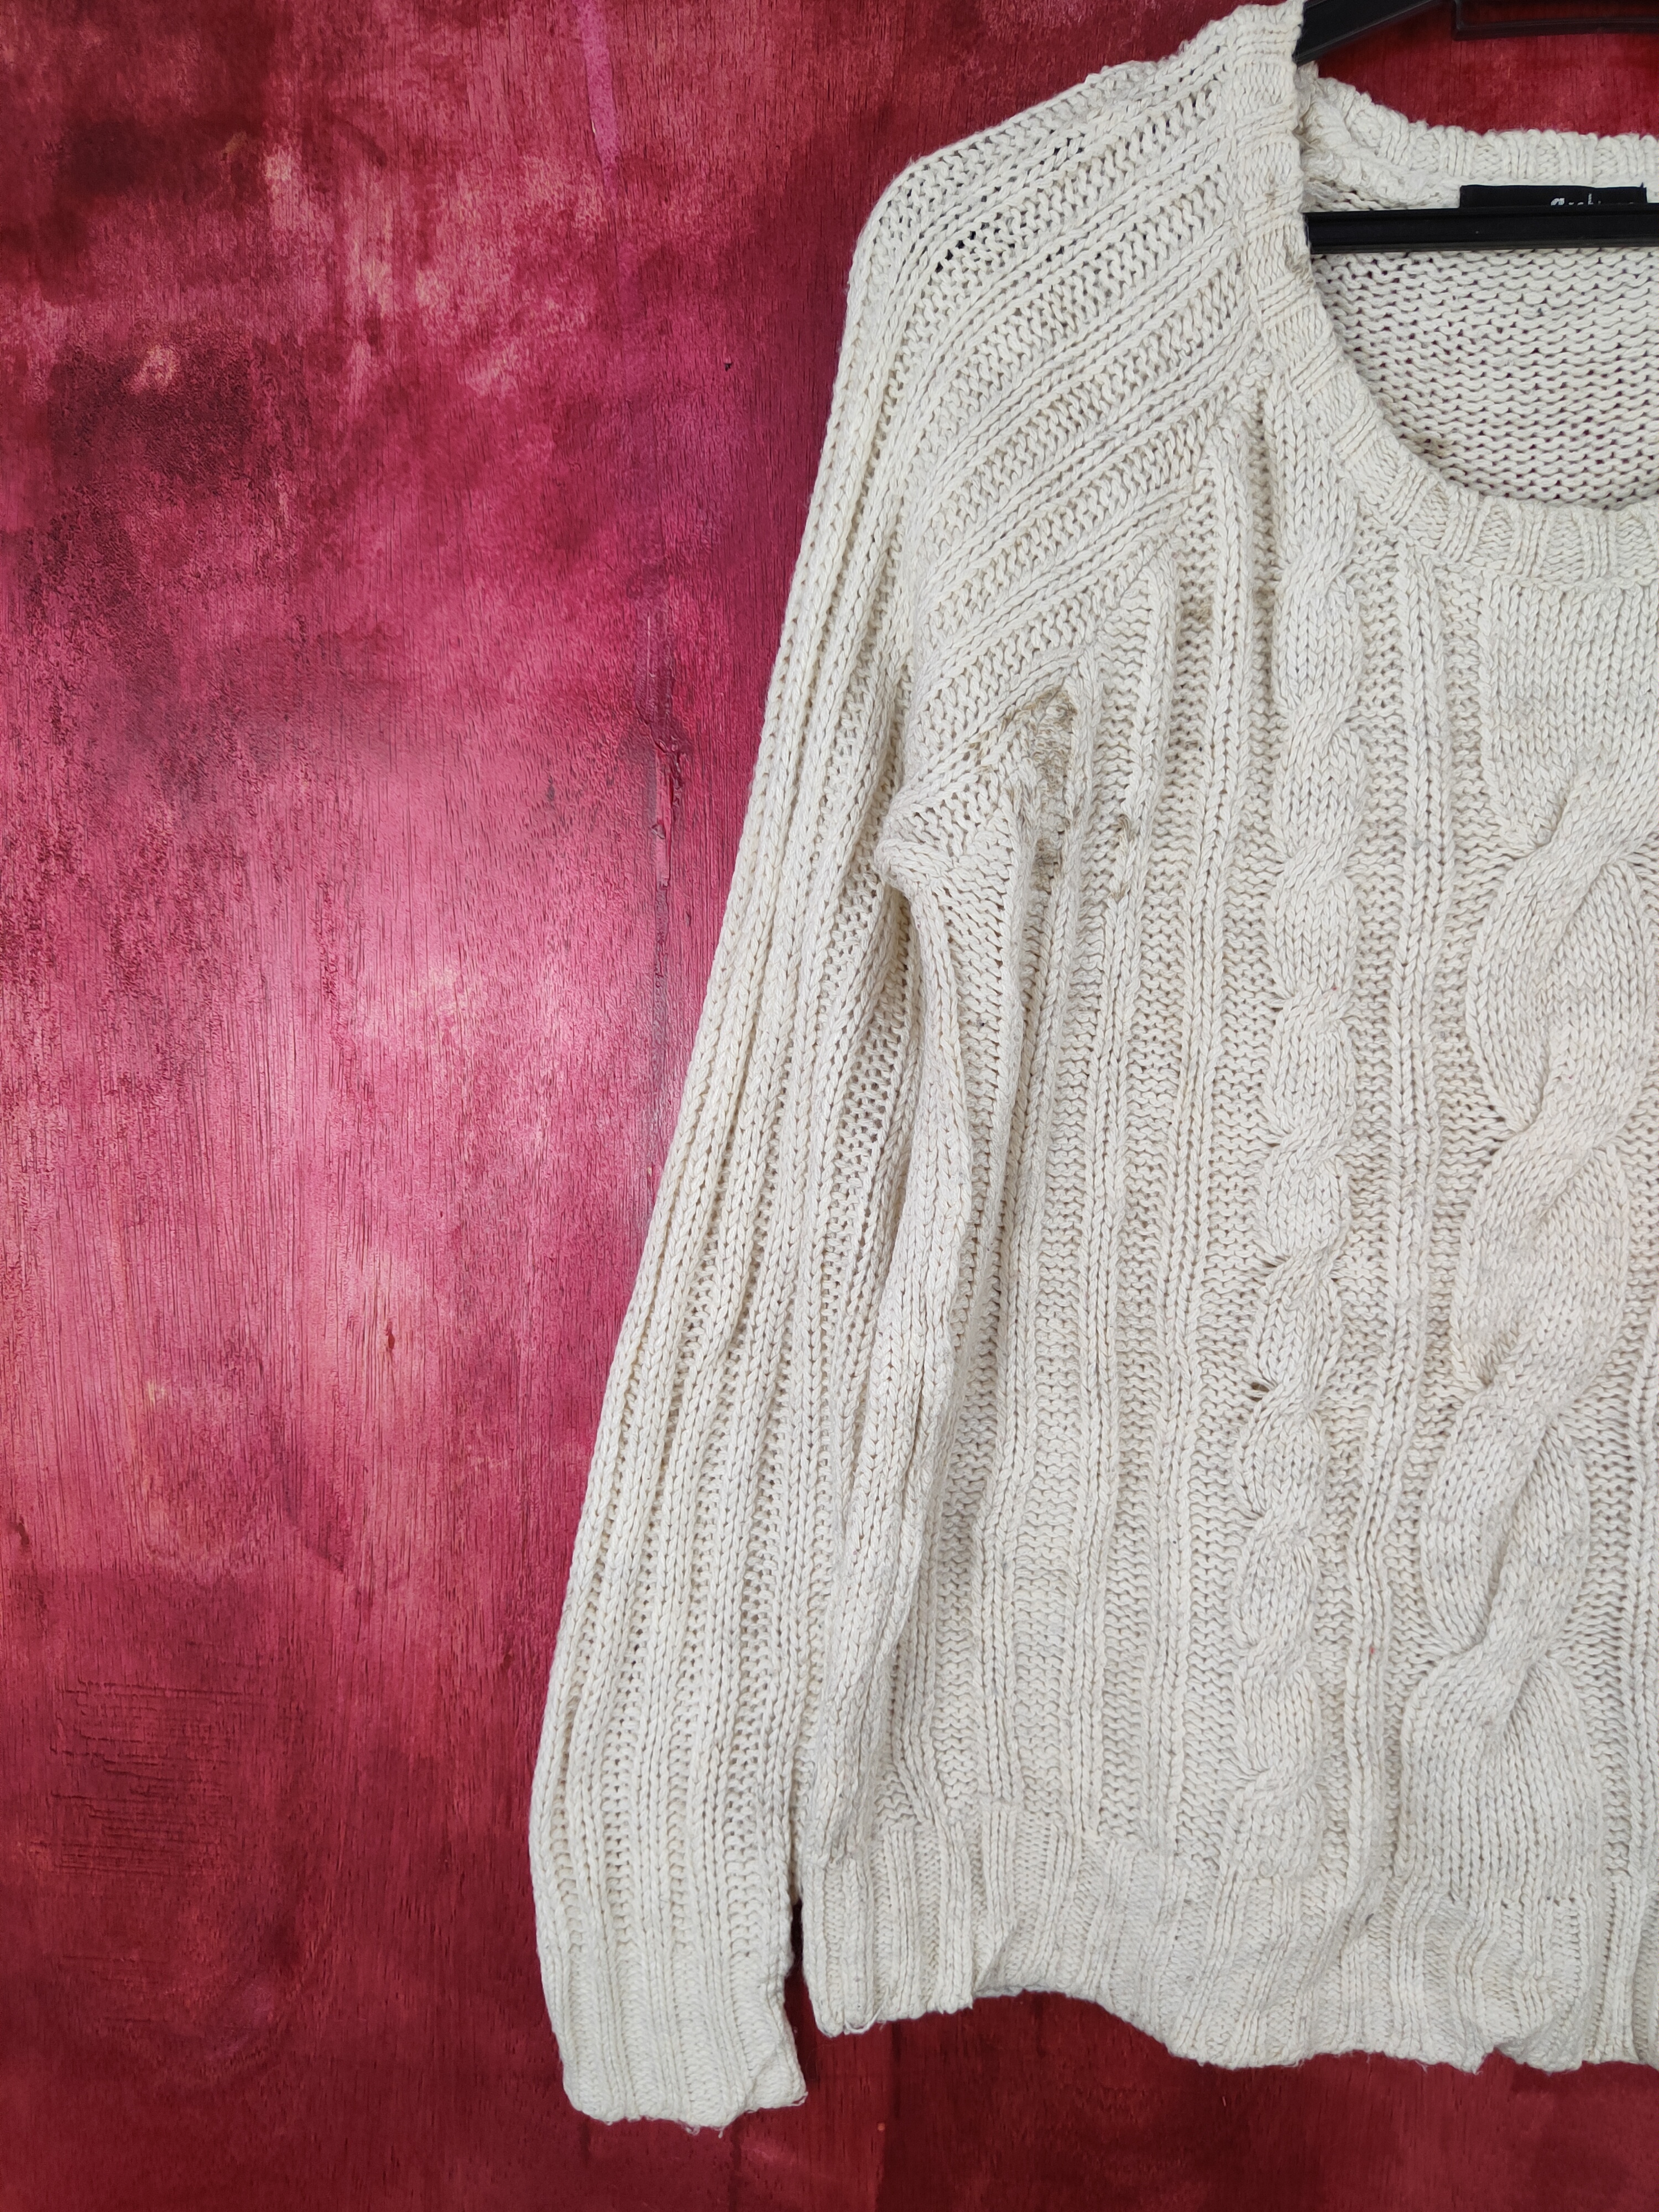 Japanese Brand - Archives White Knitwear Sweater Damage With Stain - 3